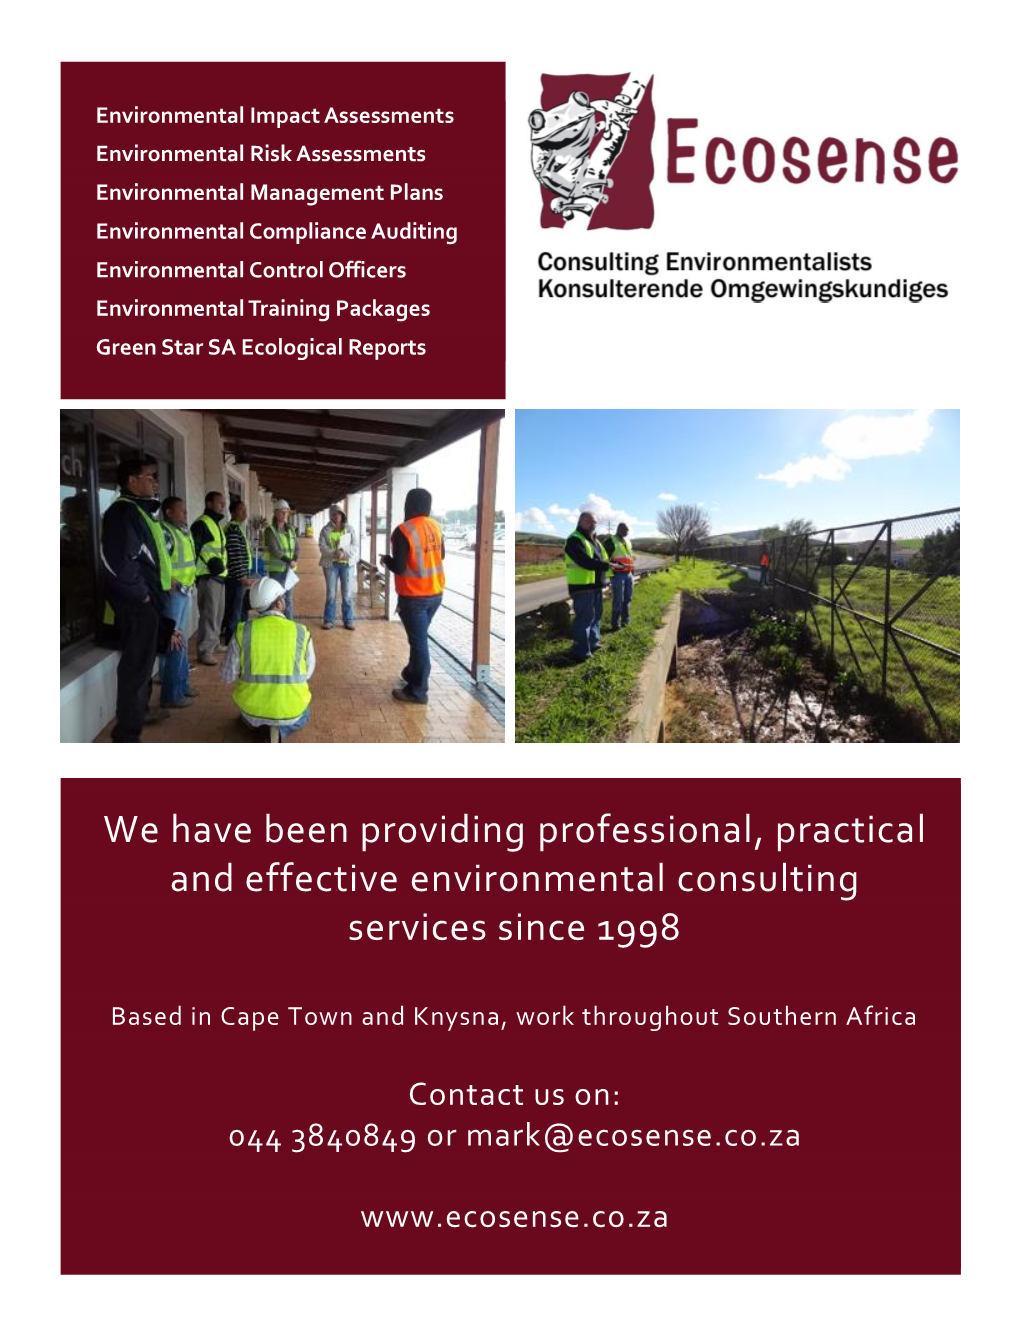 We Have Been Providing Professional, Practical and Effective Environmental Consulting Services Since 1998